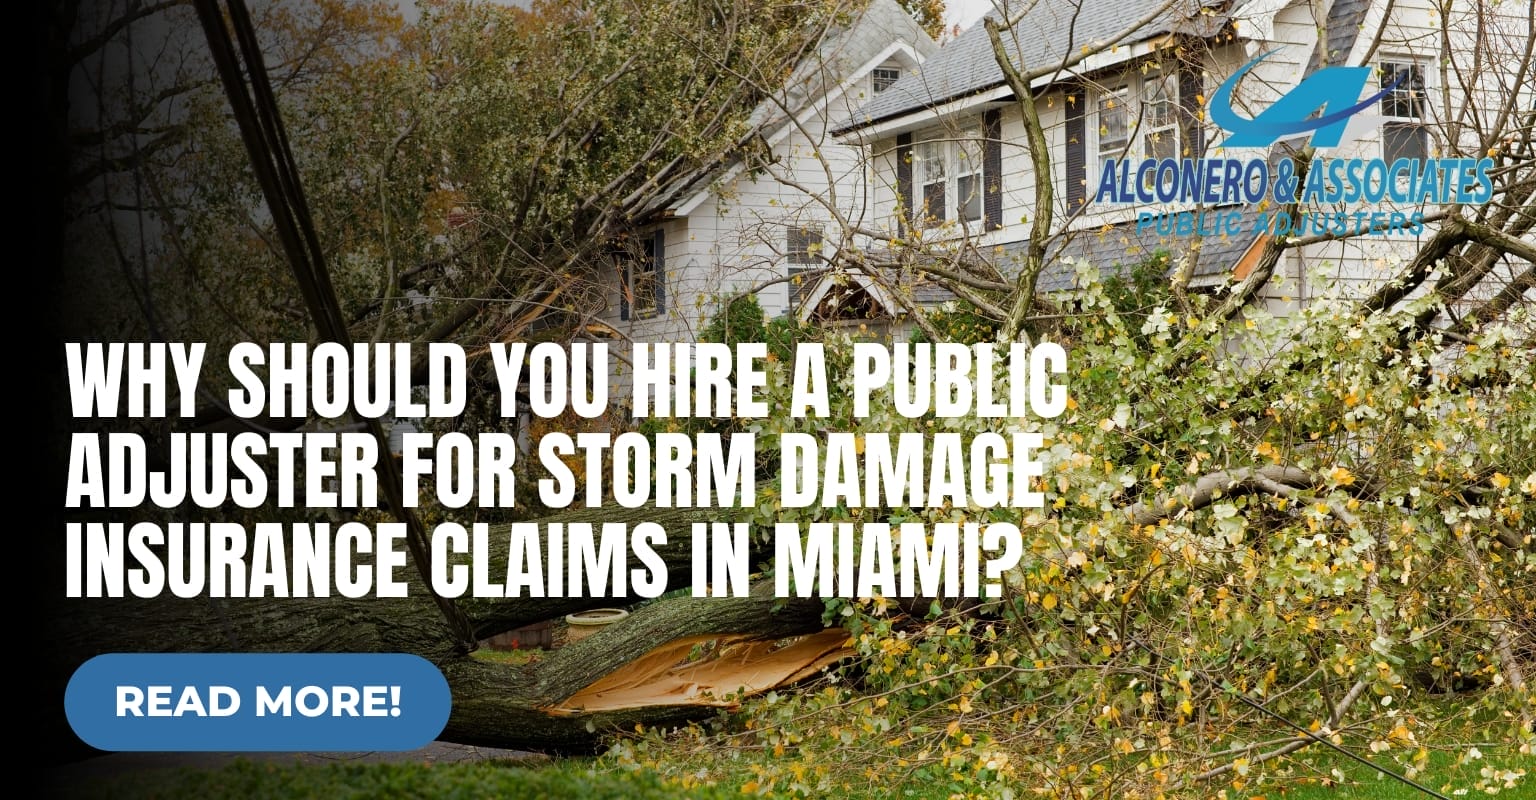 Why Should You Hire a Public Adjuster for Storm Damage Insurance Claims in Miami?